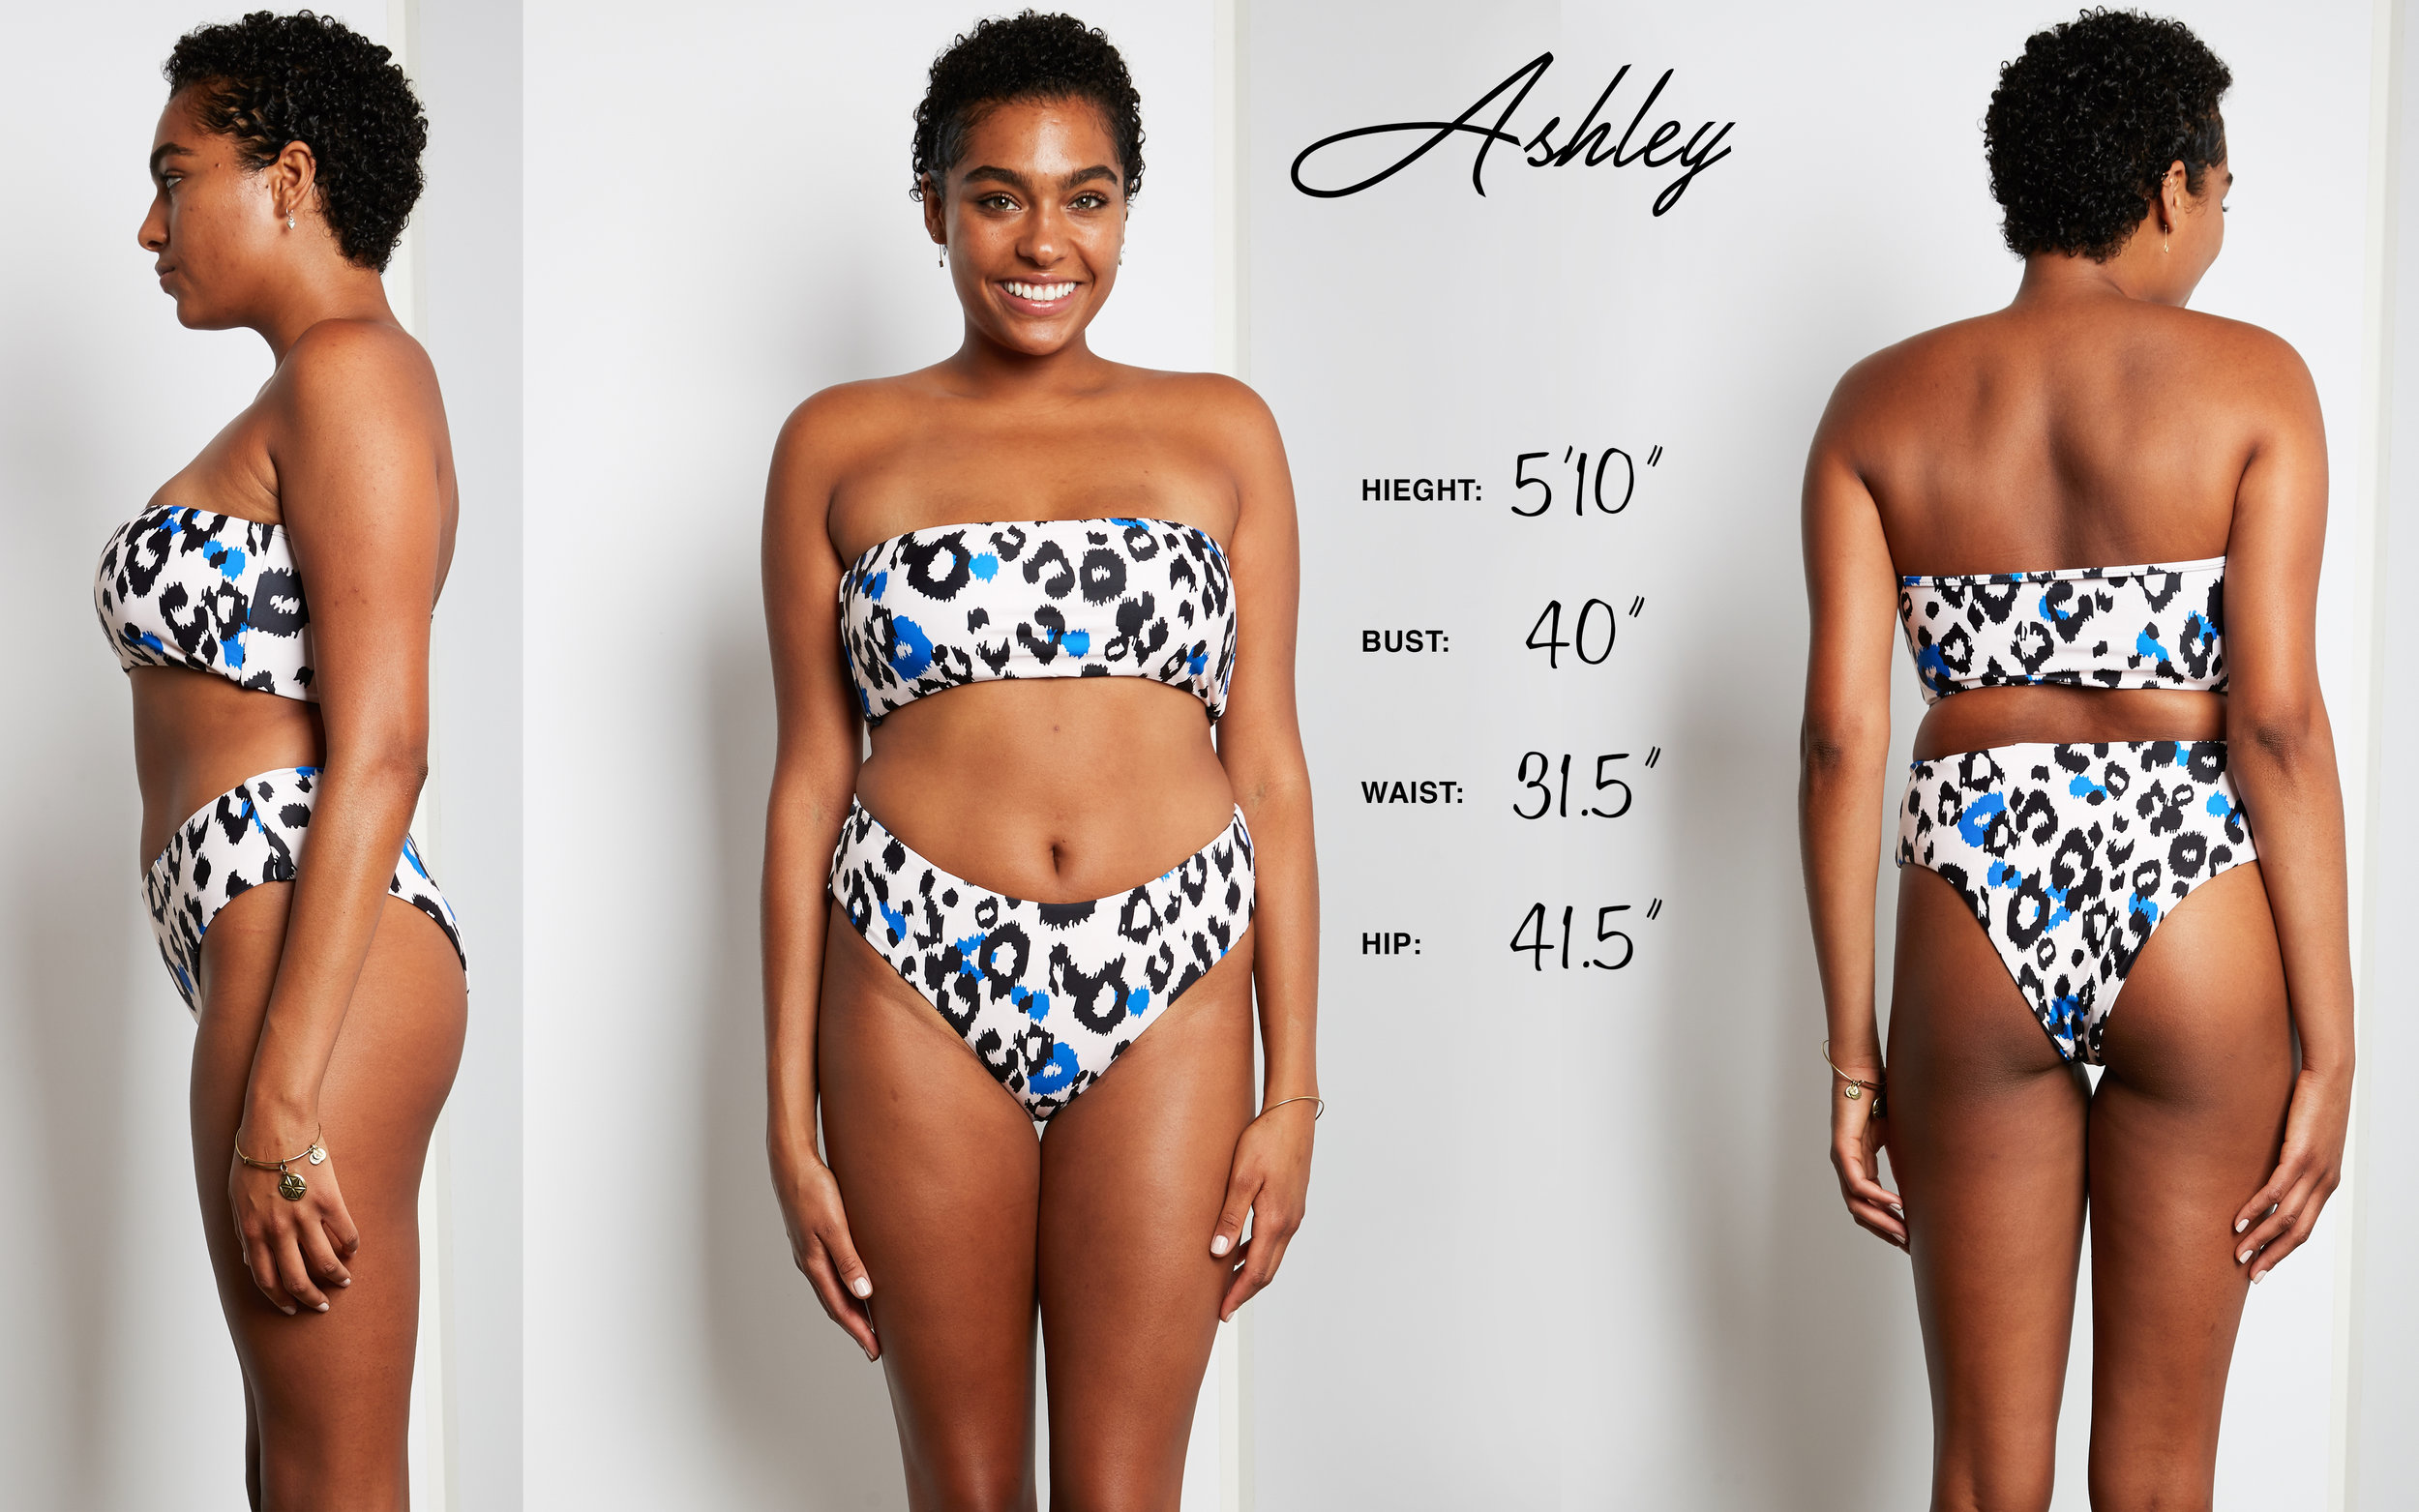 I was looking up body types and found this. It's the same size woman with  different colored bathing suits and shapes in front of her. How inclusive  and representative of body types.